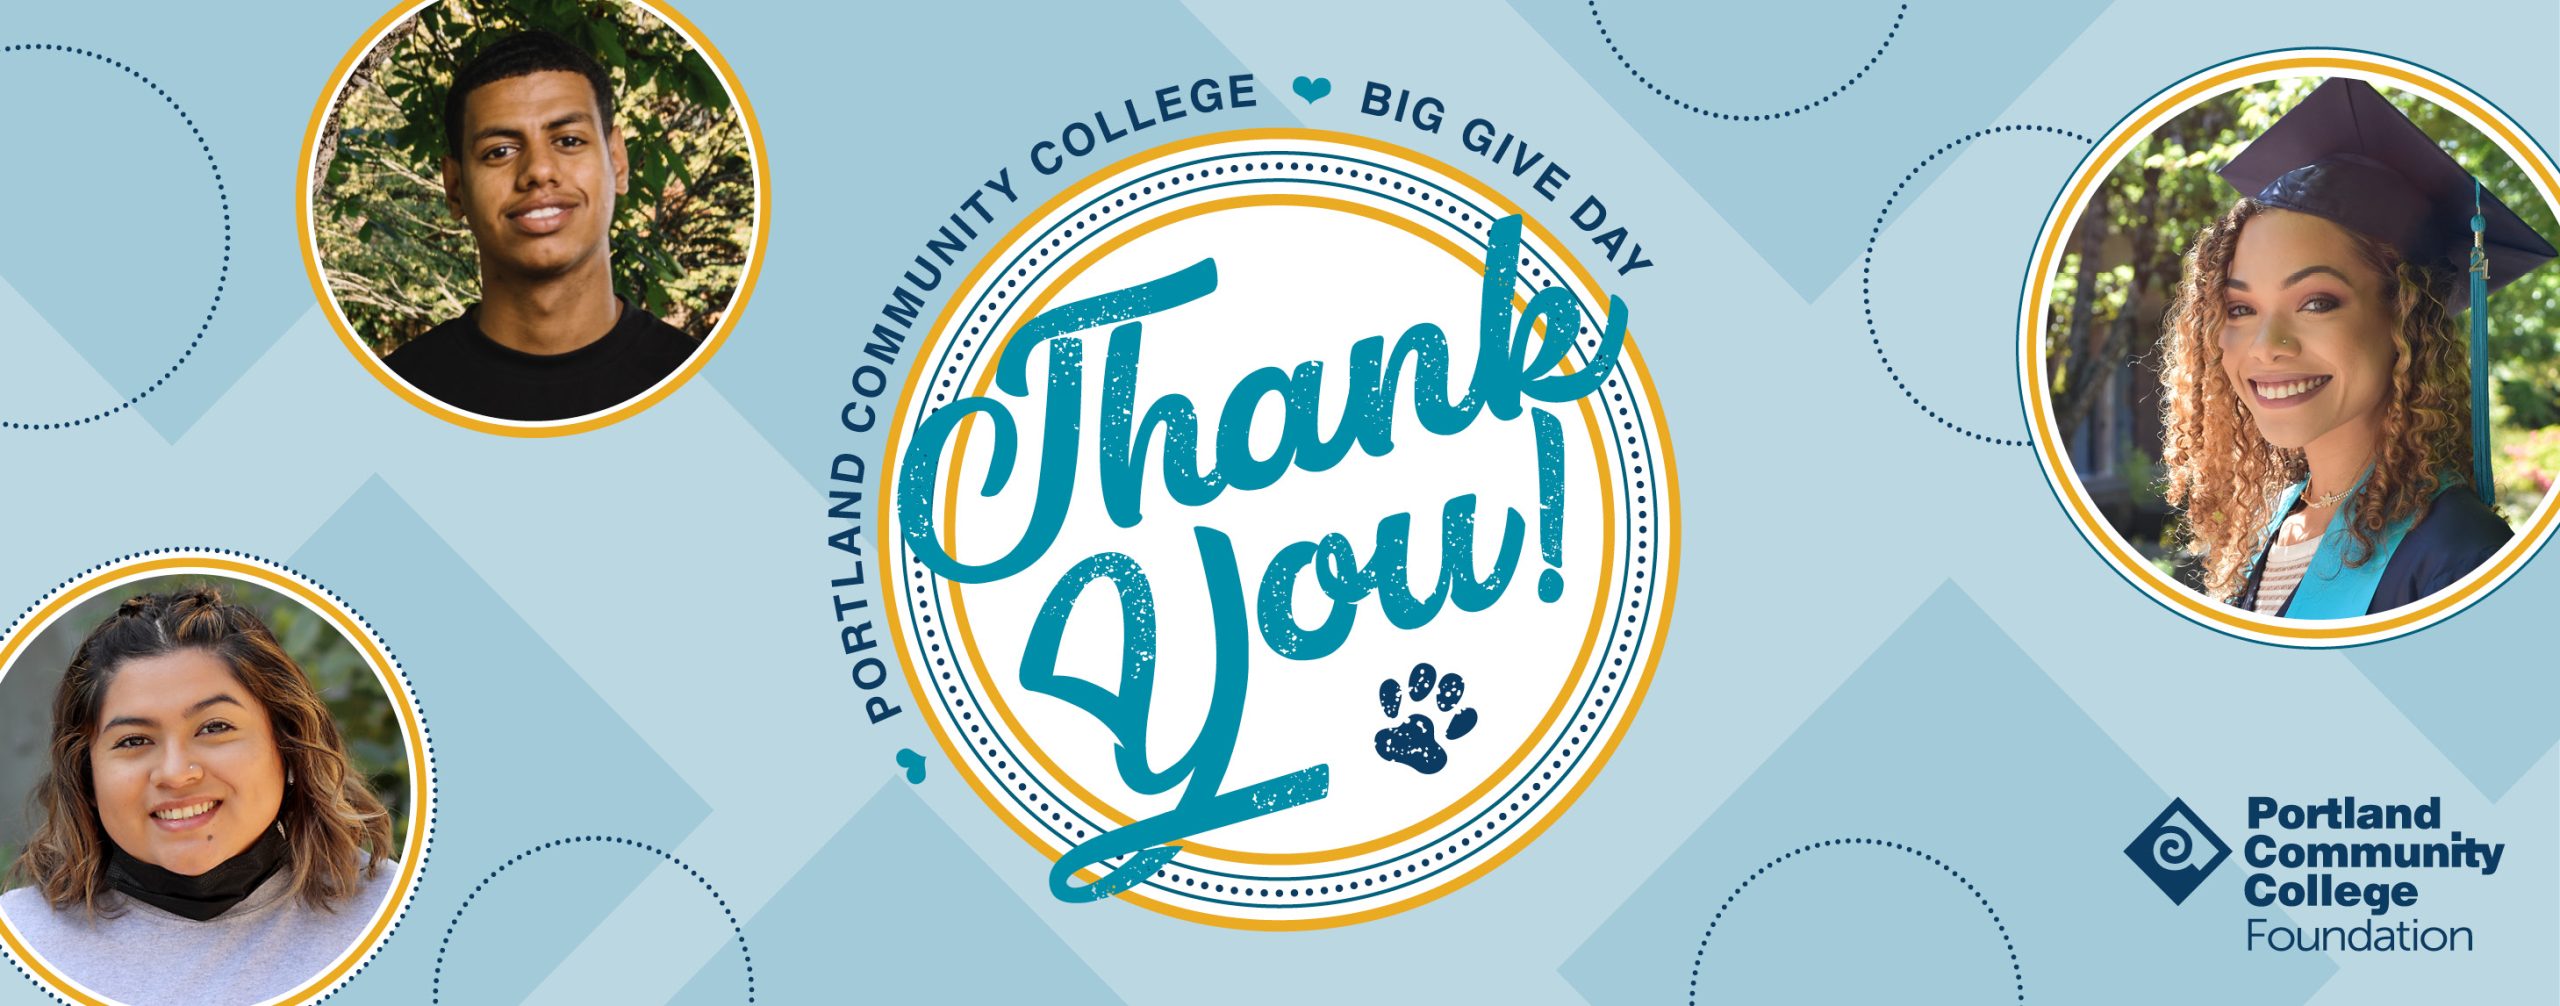 Thank you for supporting Big Give Day